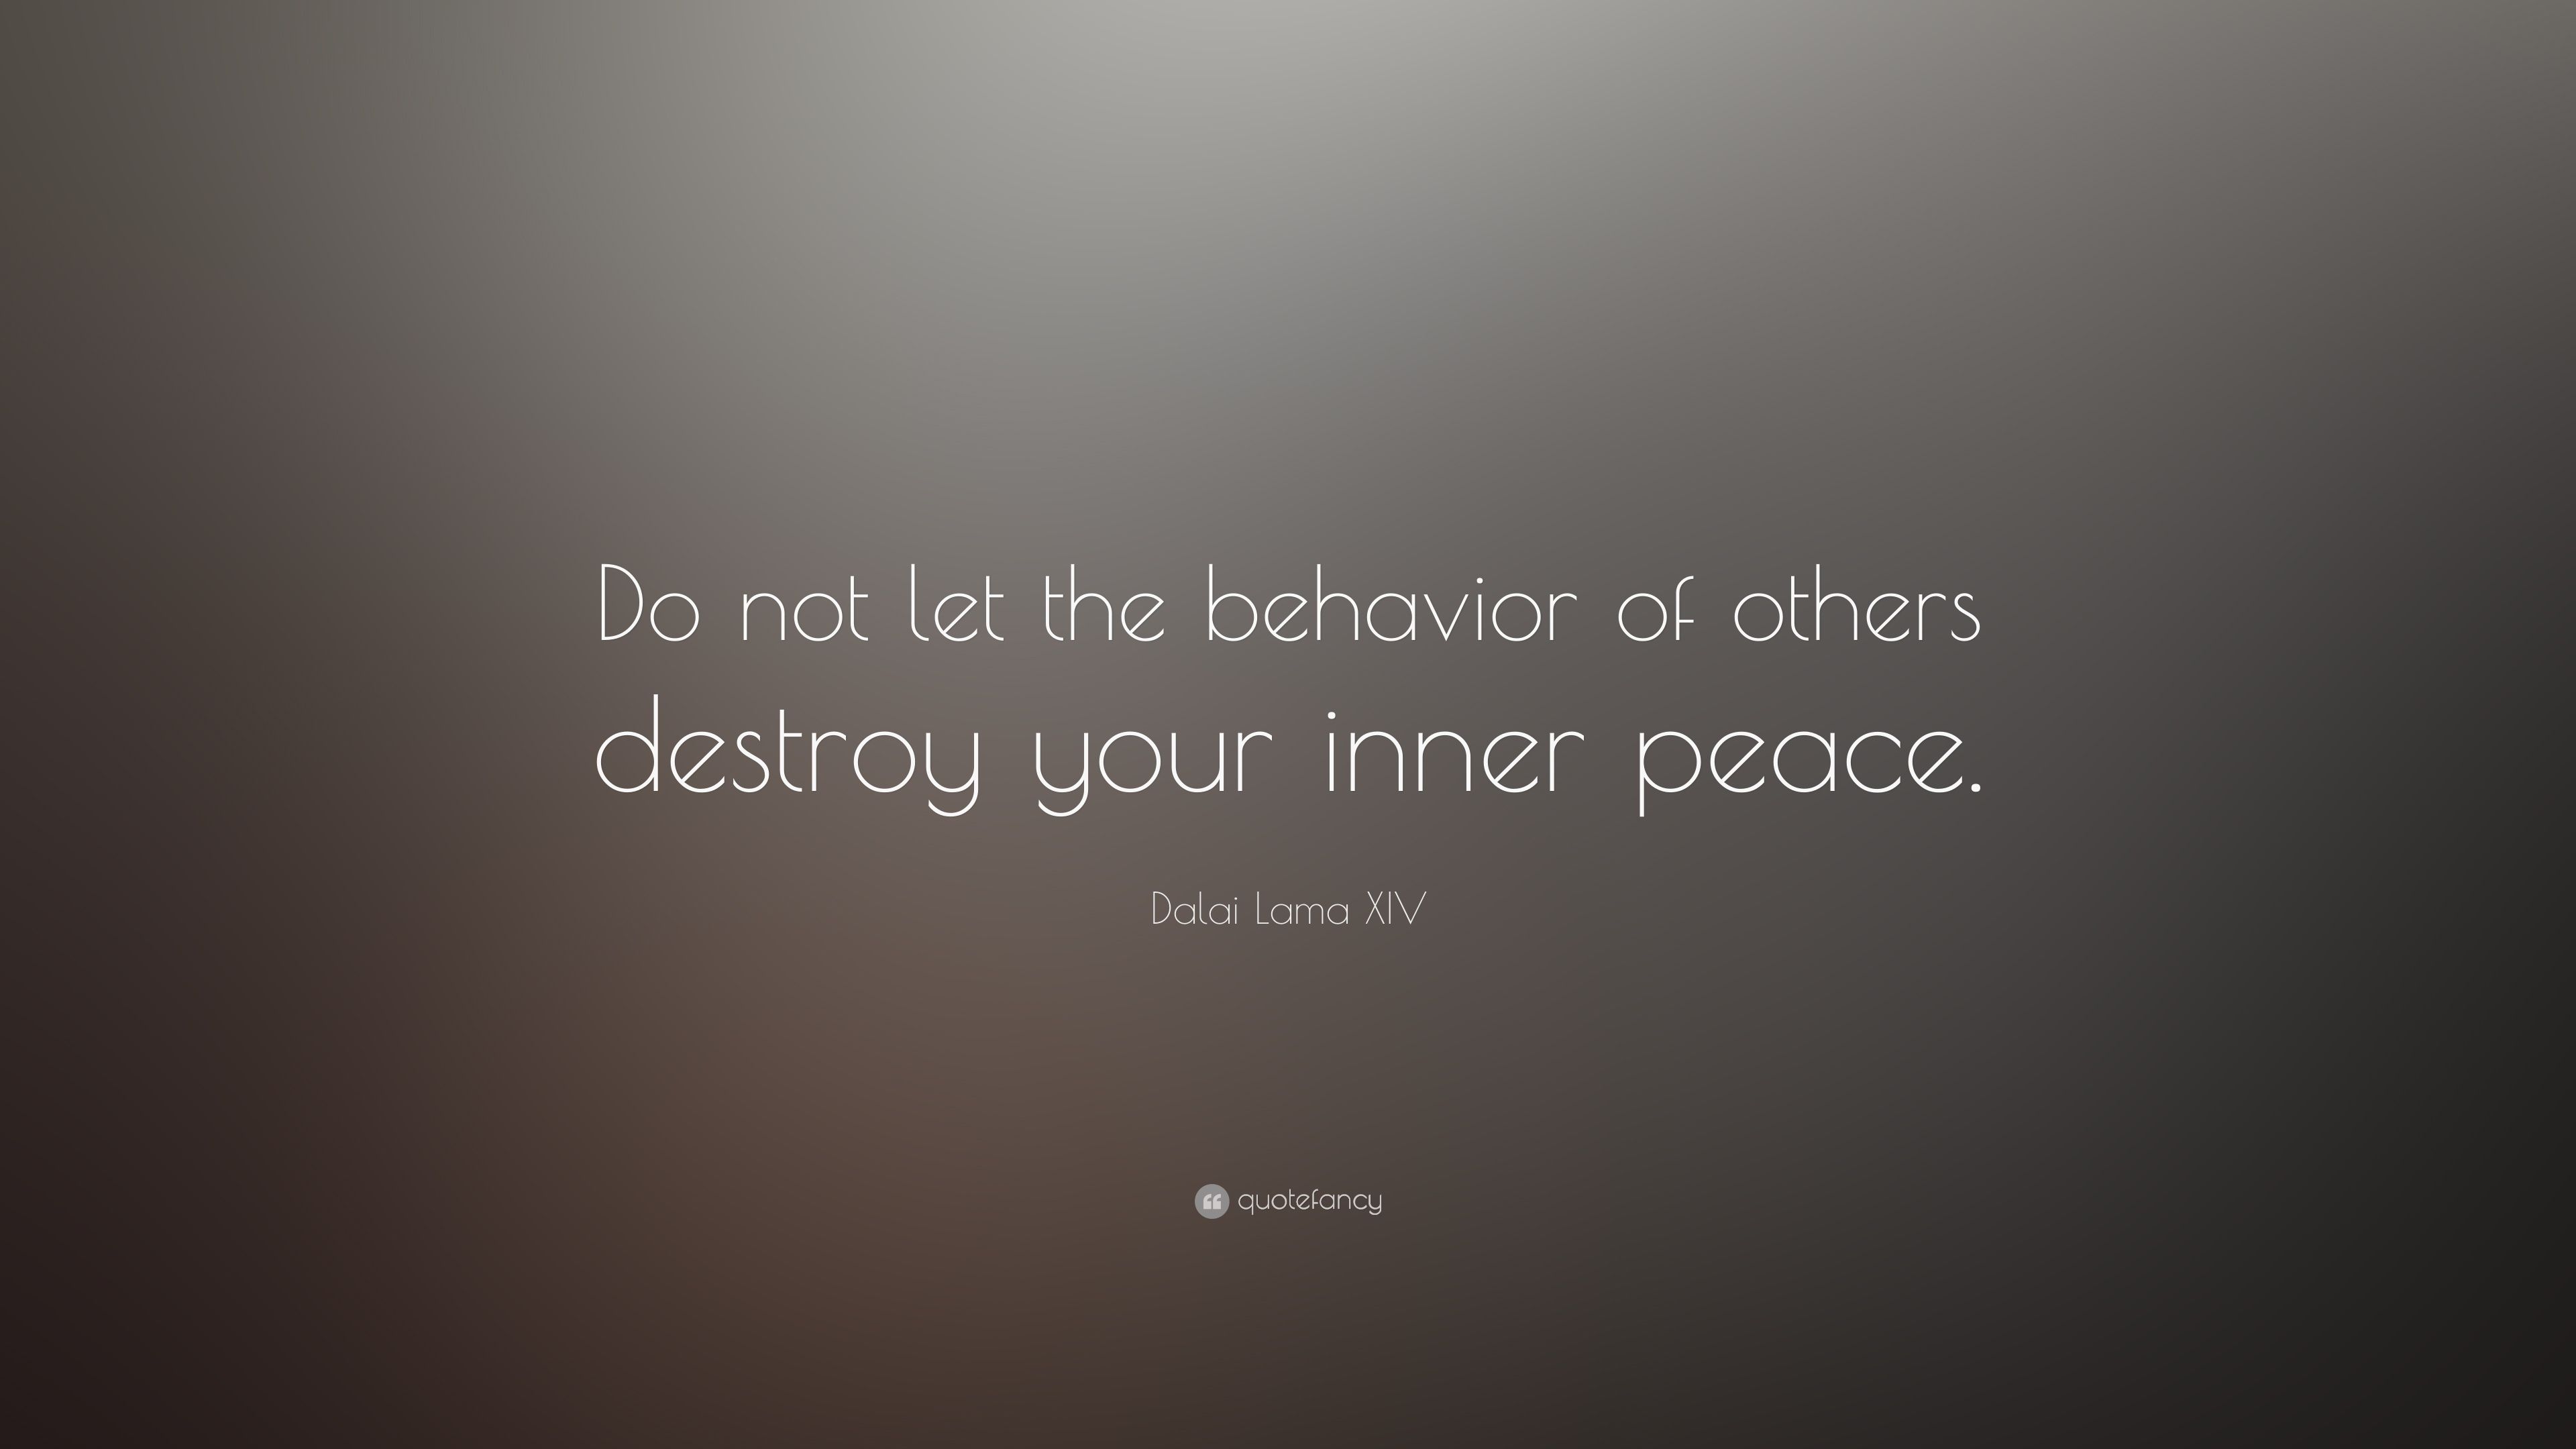 Dalai Lama XIV Quote: “Do not let the behavior of others destroy your inner peace.” (34 wallpaper)